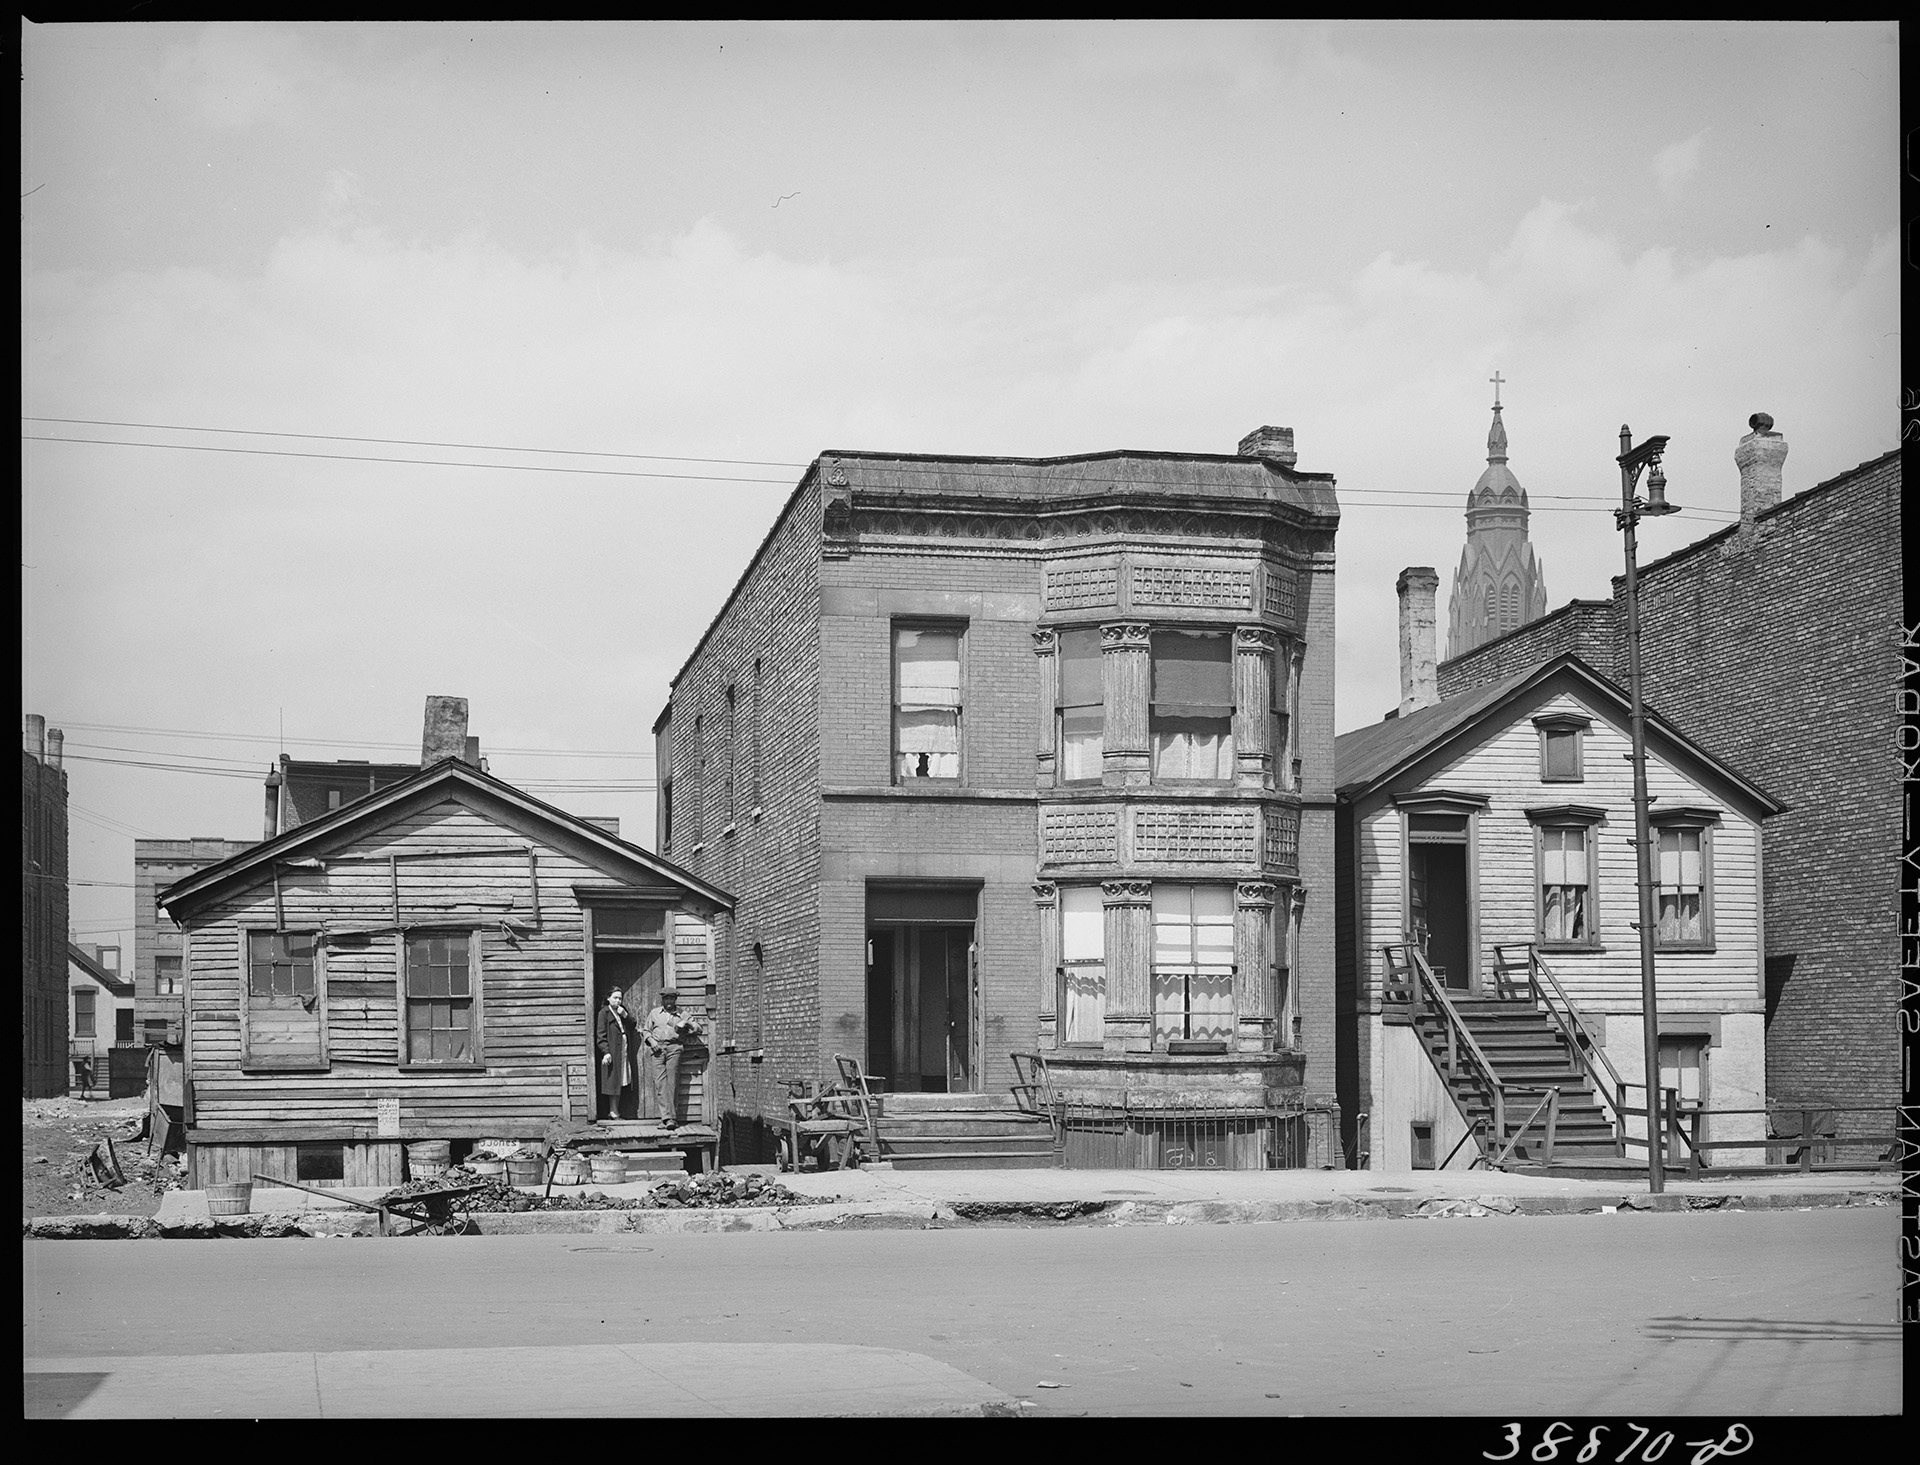 Housing in a Black neighborhood in Chicago during the 1940s.